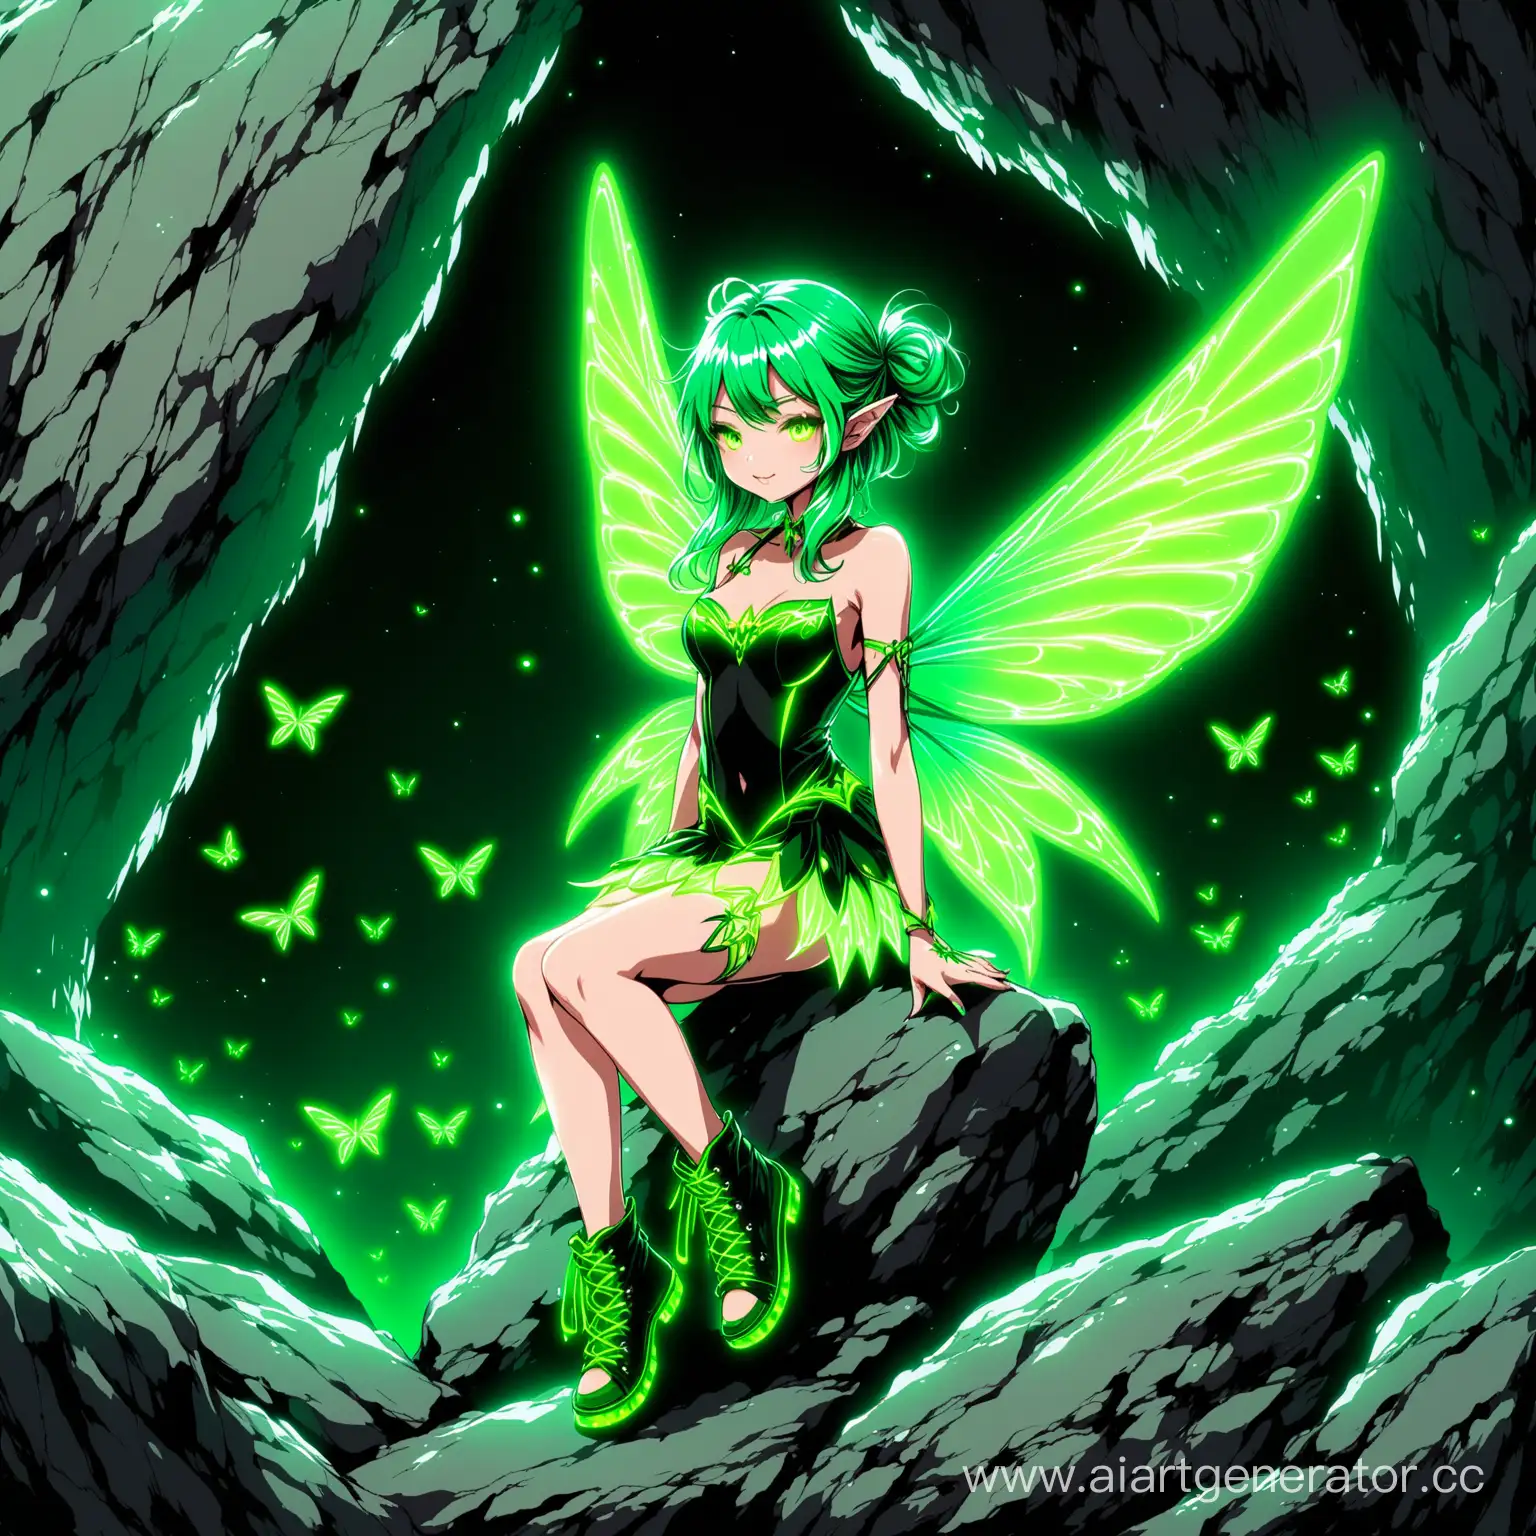 Fairy with green neon wings in rock style